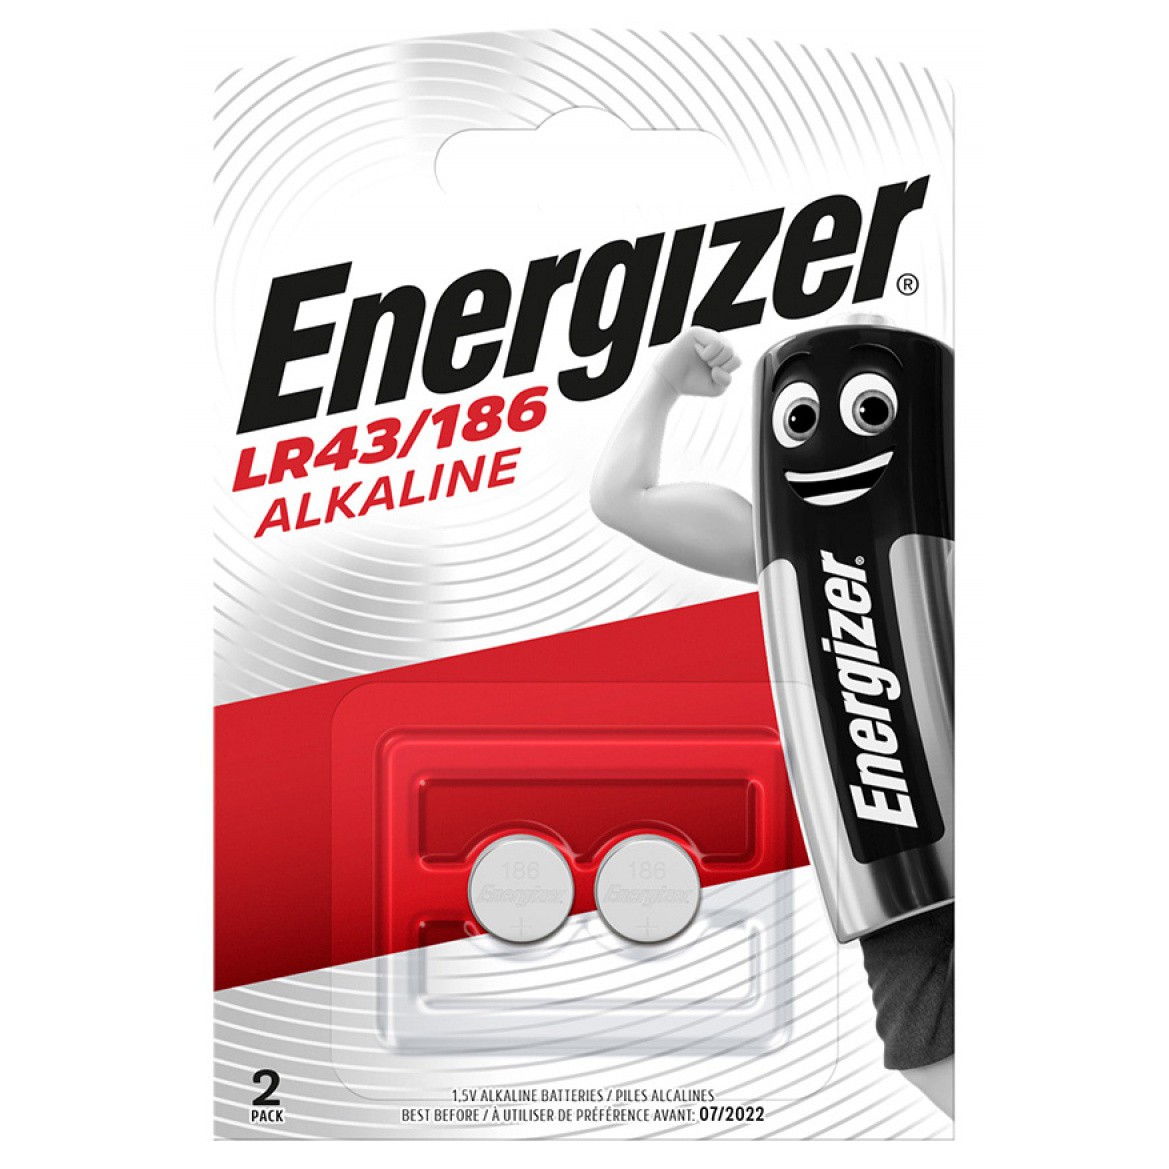 Buttoncell Energizer LR43/186 Τεμ. 2